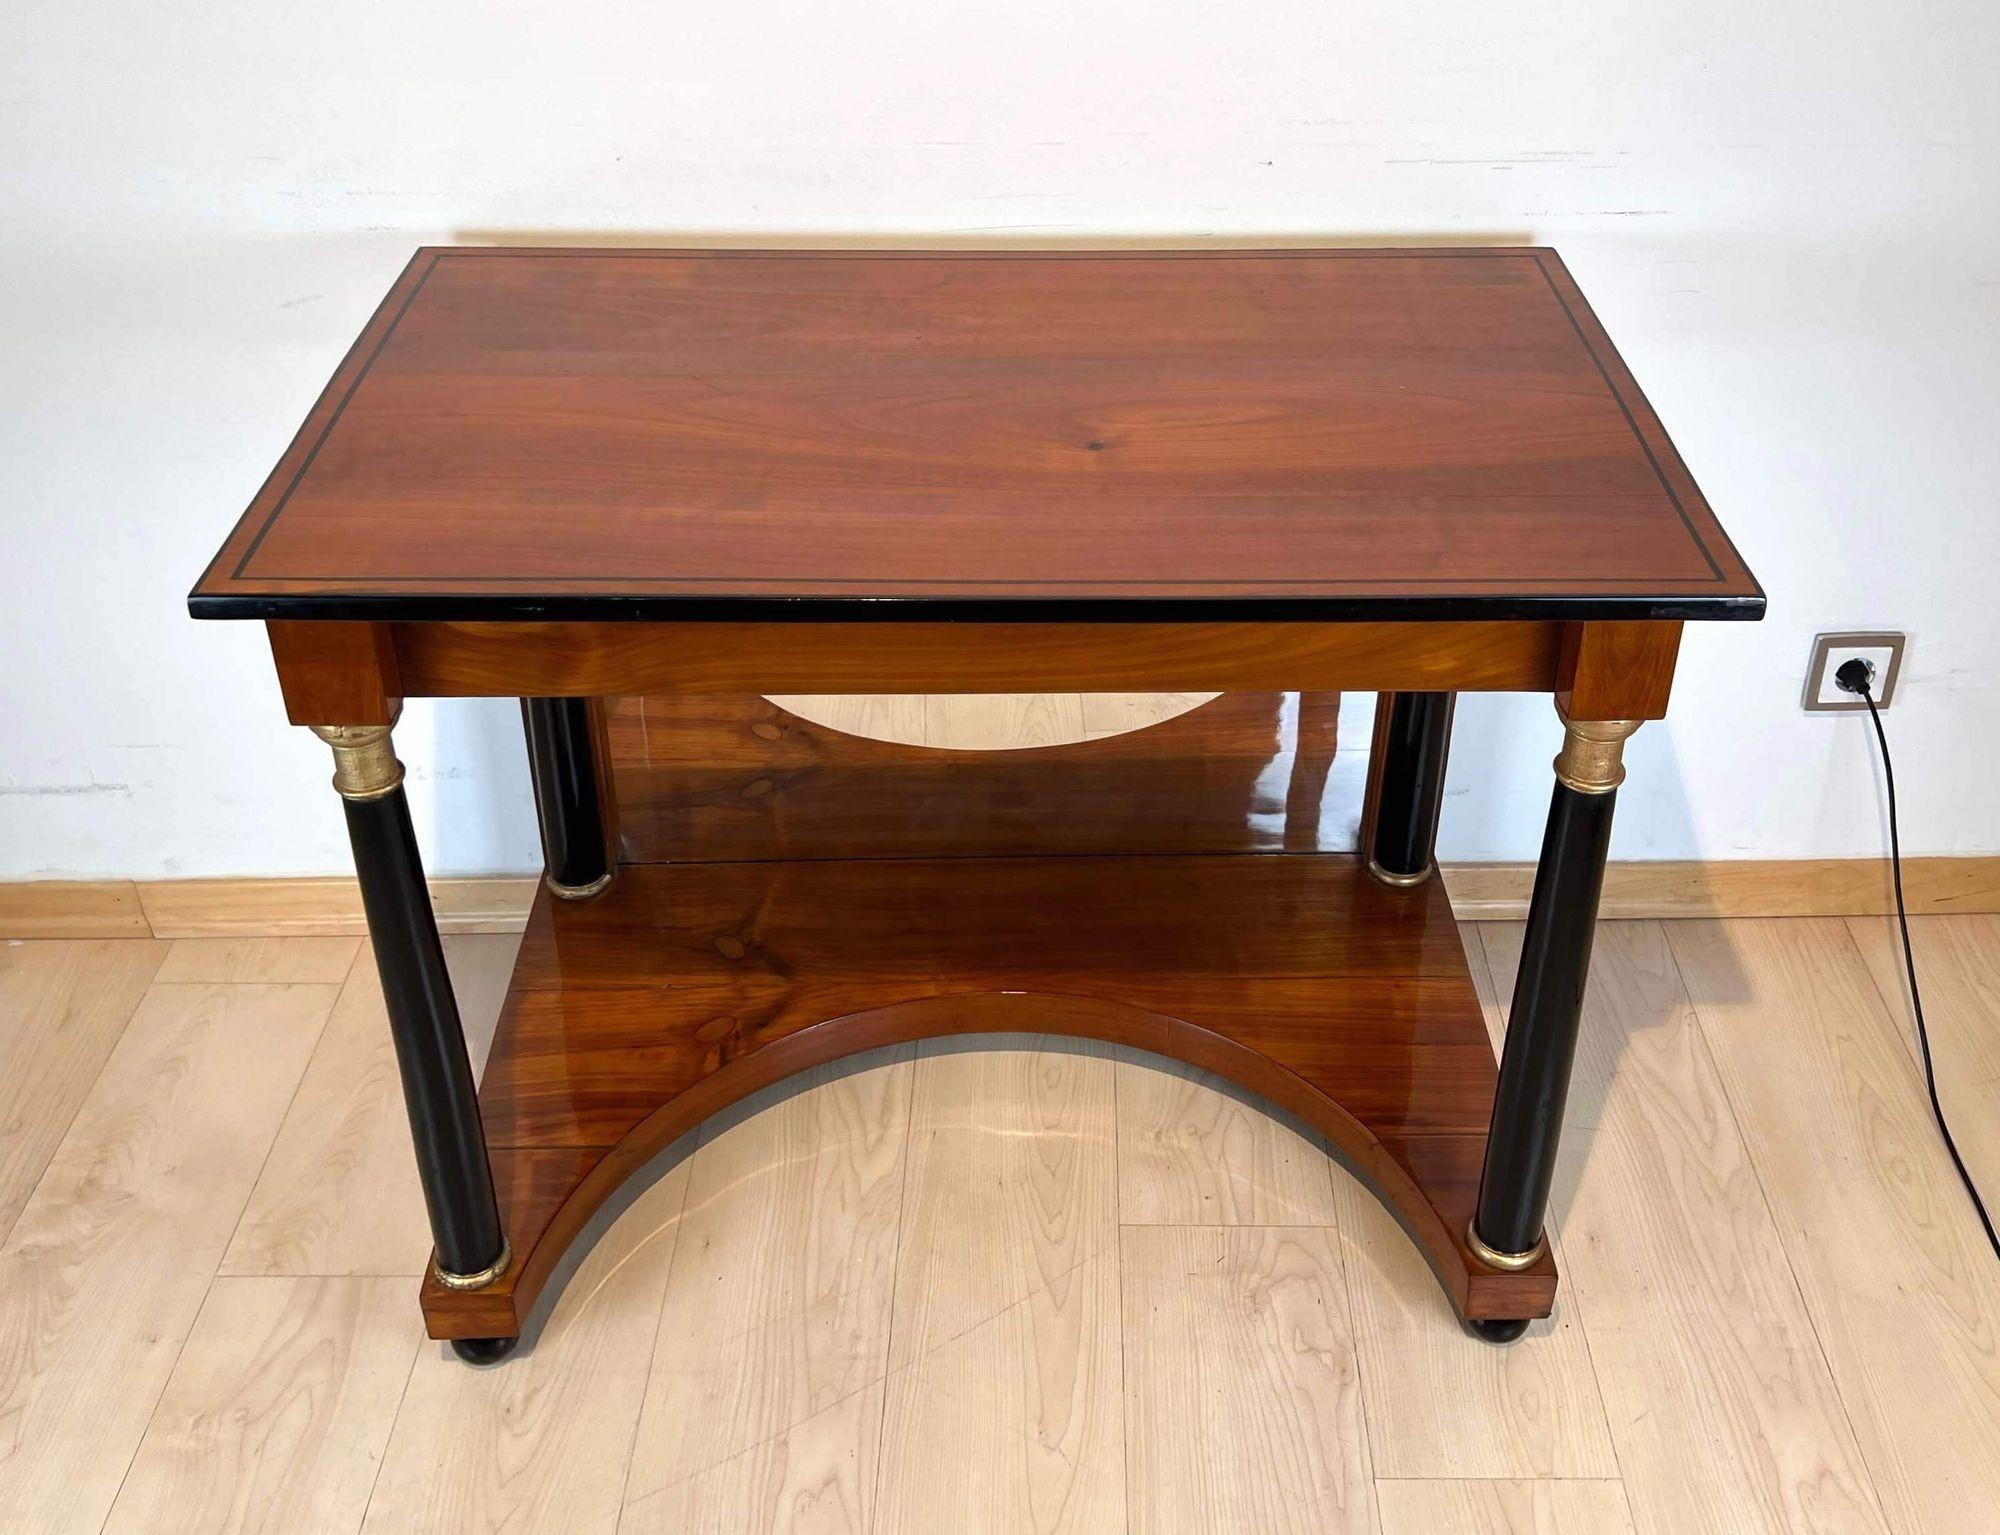 Biedermeier Console Table, Cherry Wood, Full Columns, South Germany circa 1820 For Sale 7